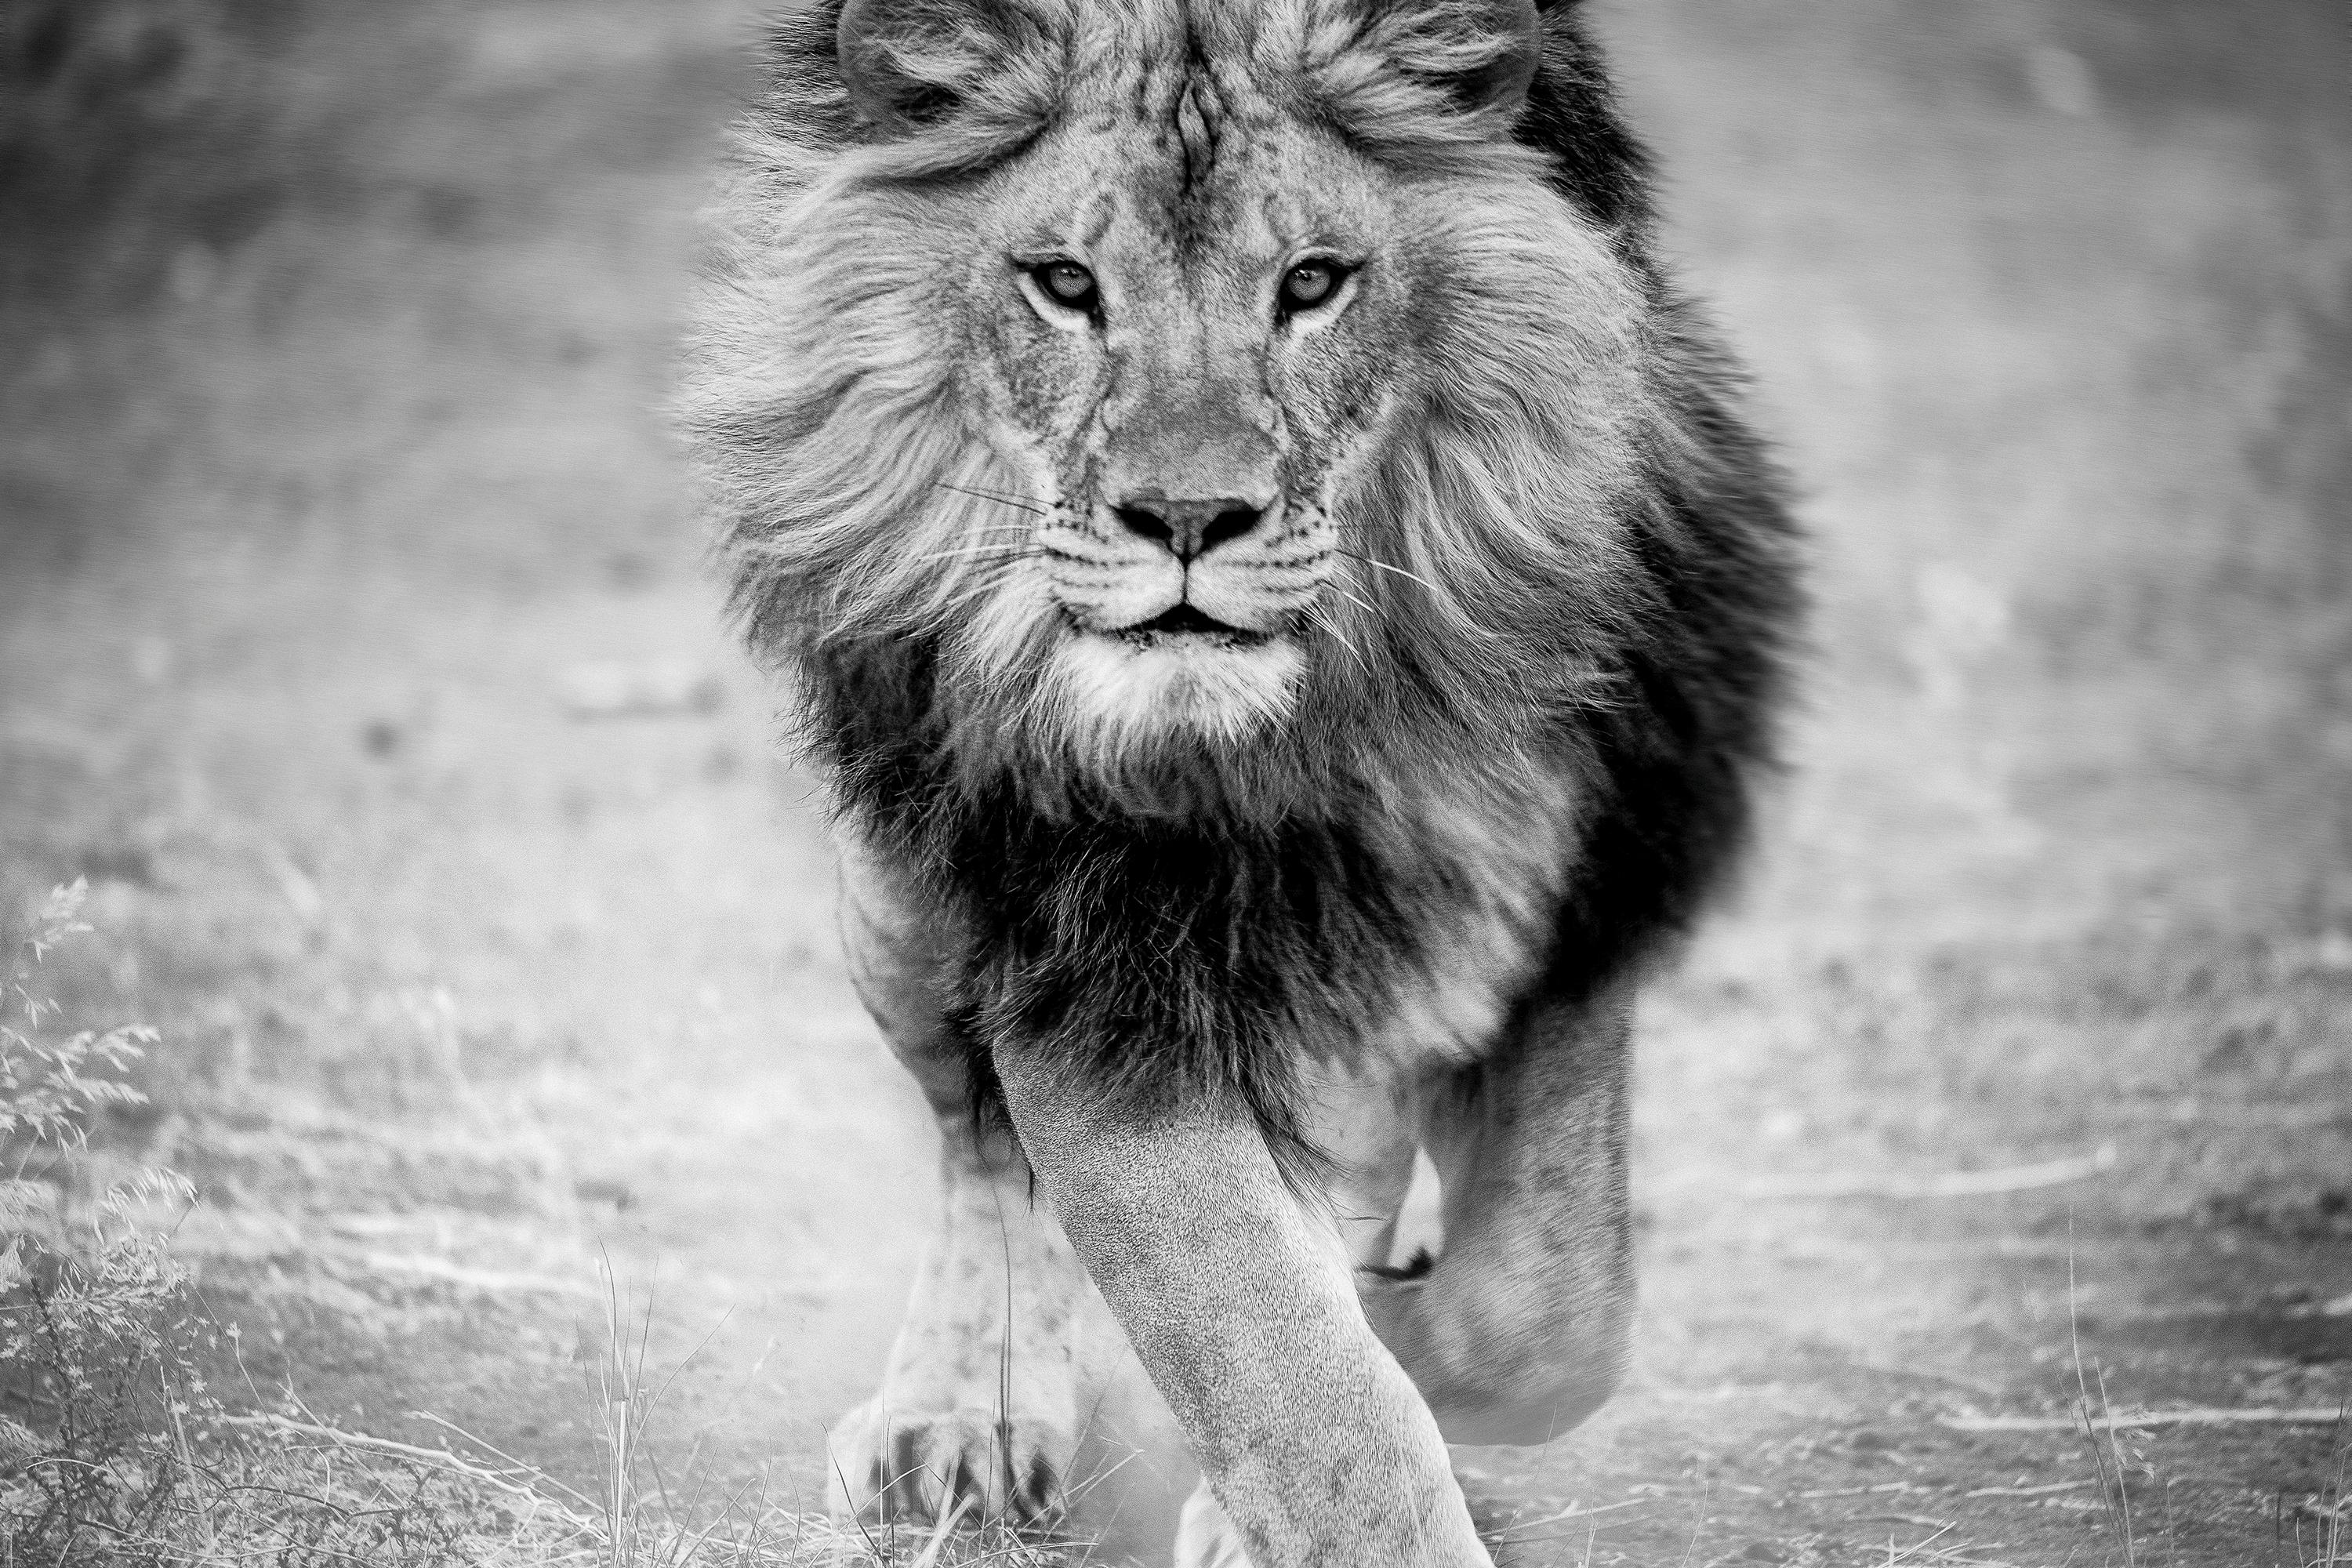 Shane Russeck Black and White Photograph - Panthera Leo - 40x60, Black and White Lion Photograph, Lion Photography Unsigned